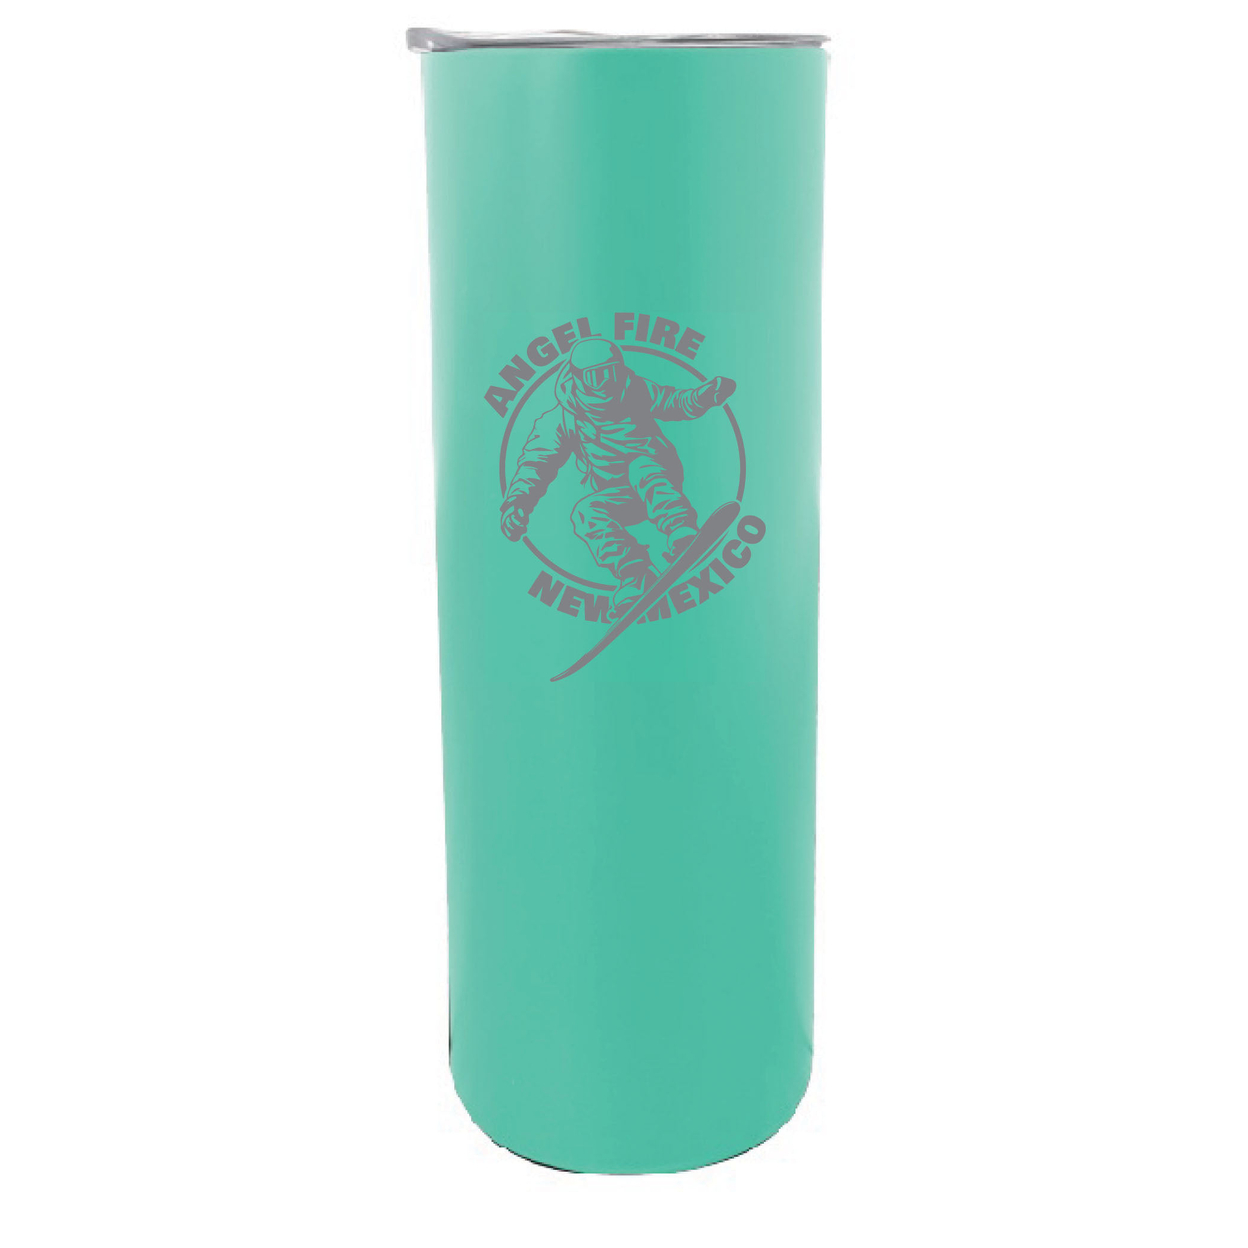 Angel Fire New Mexico Souvenir 20 Oz Engraved Insulated Stainless Steel Skinny Tumbler - Black,,Single Unit